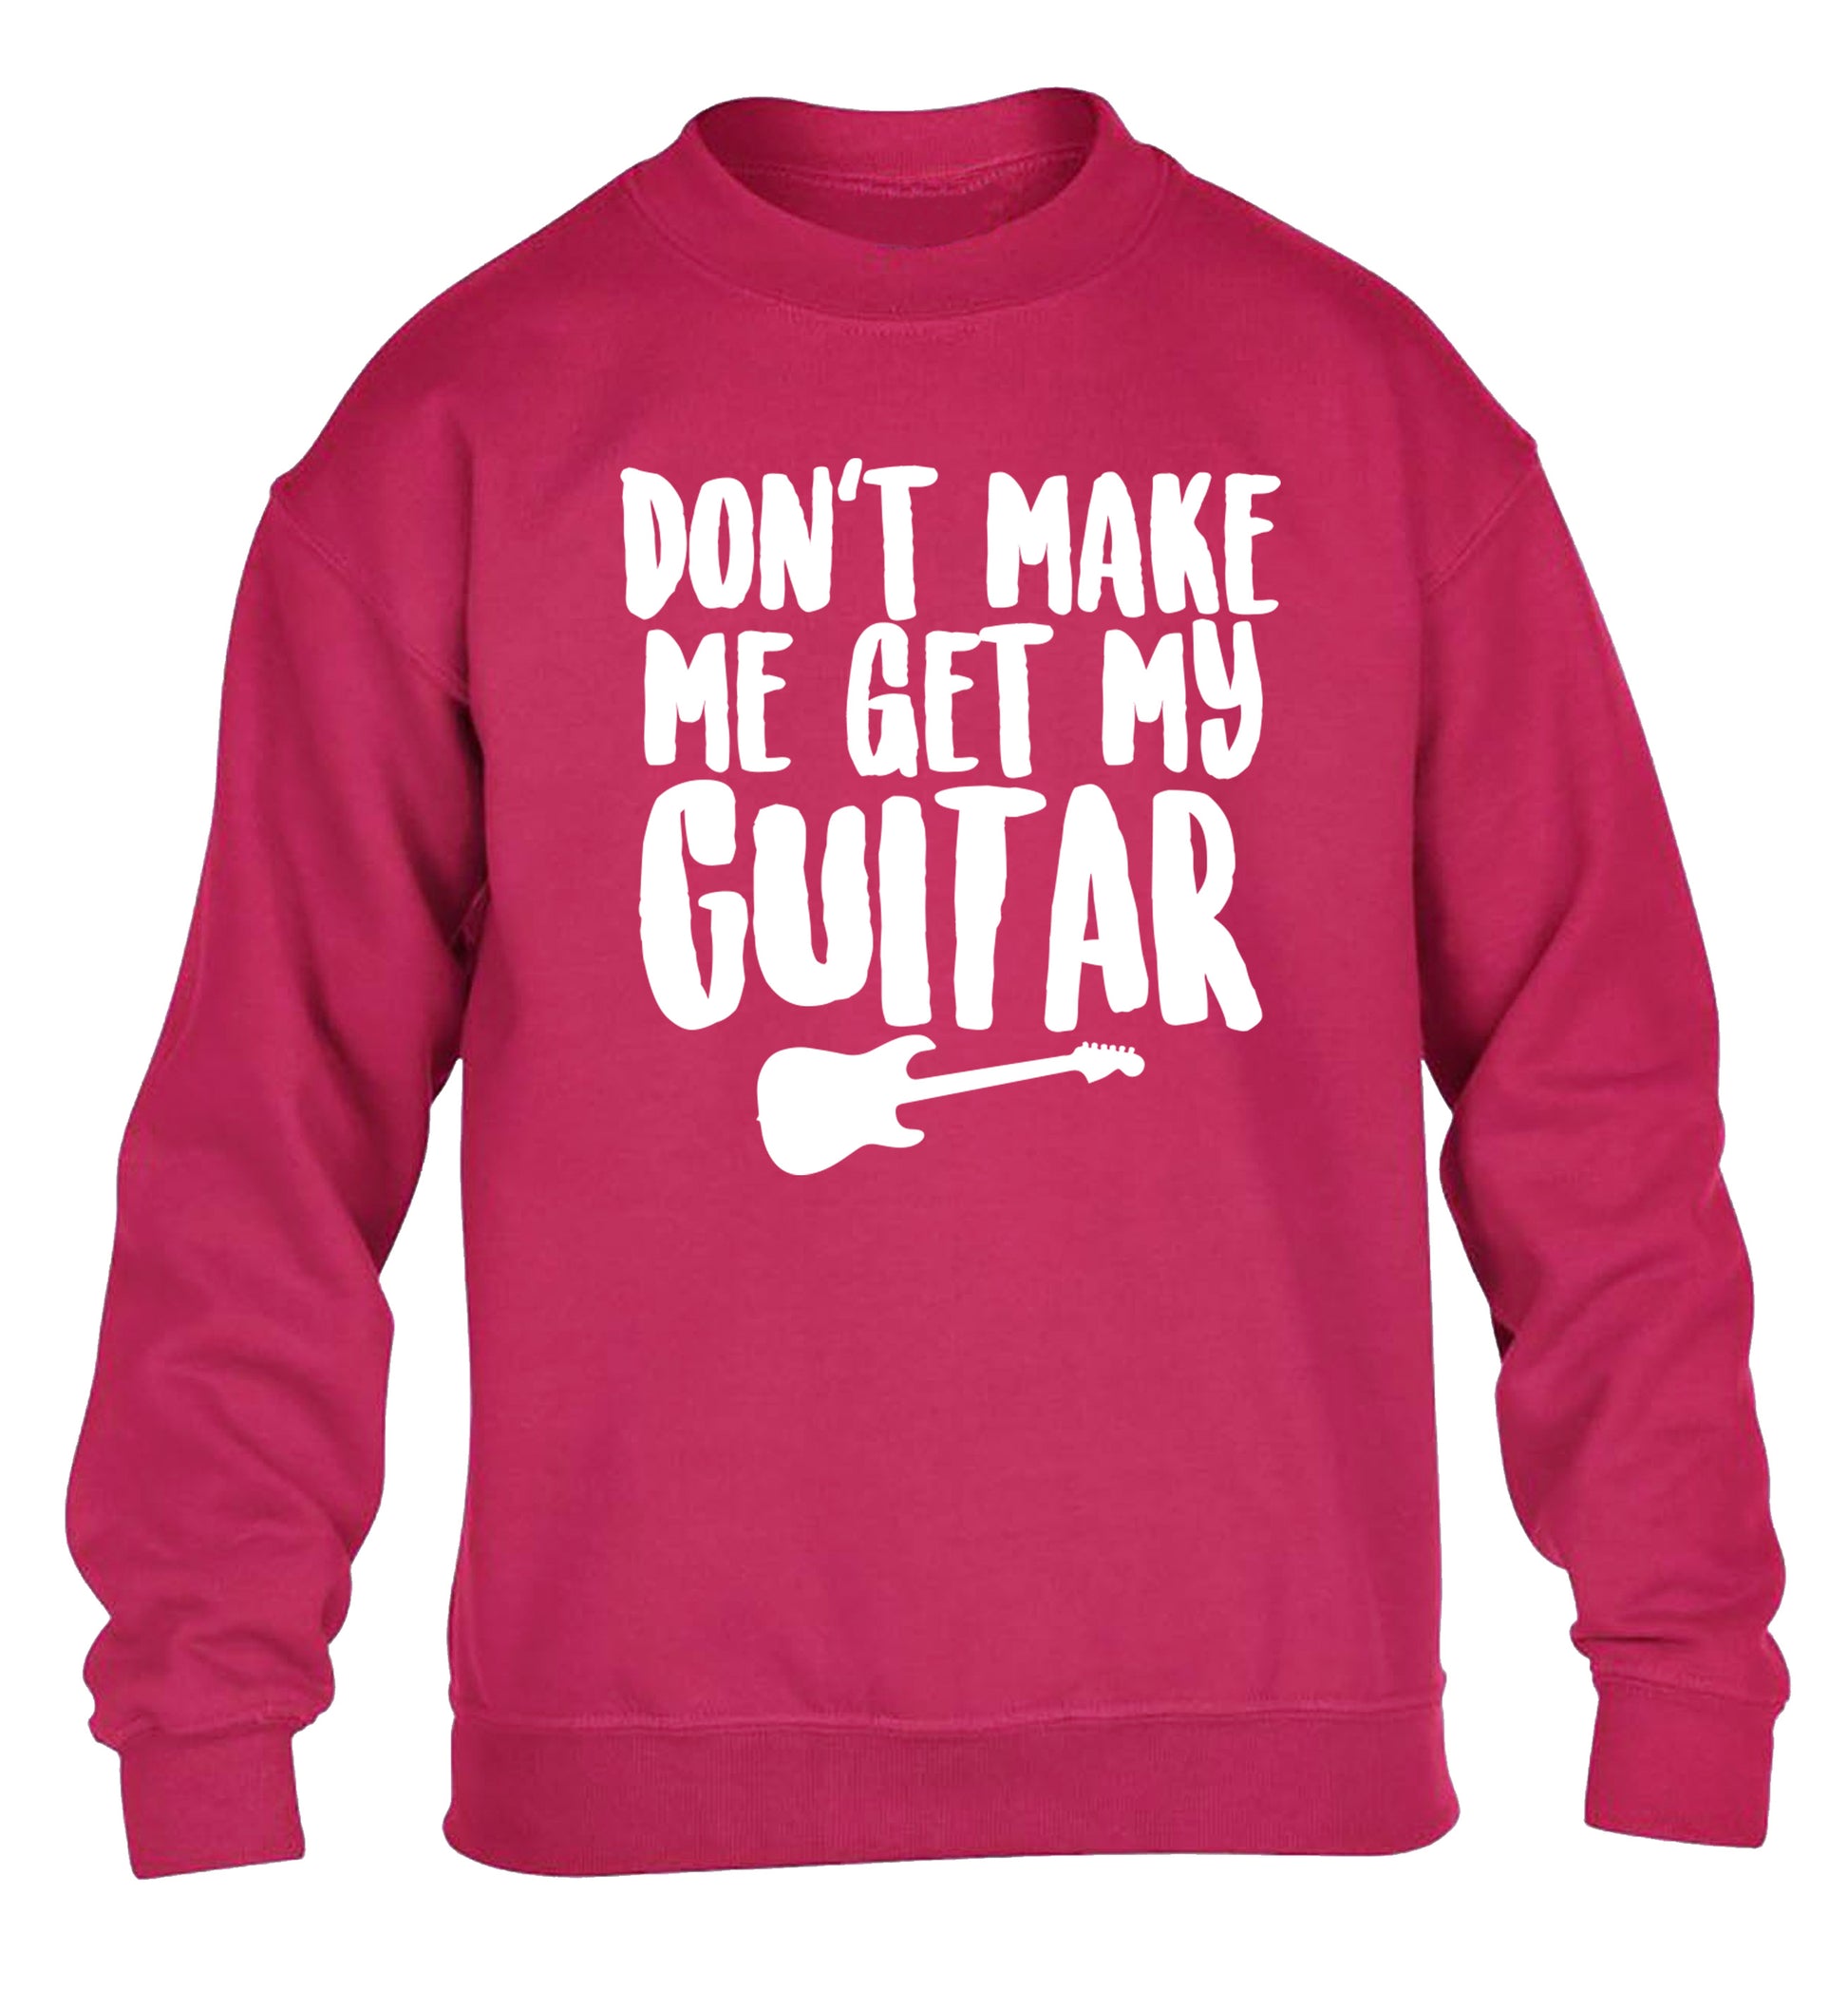 Don't make me get my guitar children's pink sweater 12-13 Years